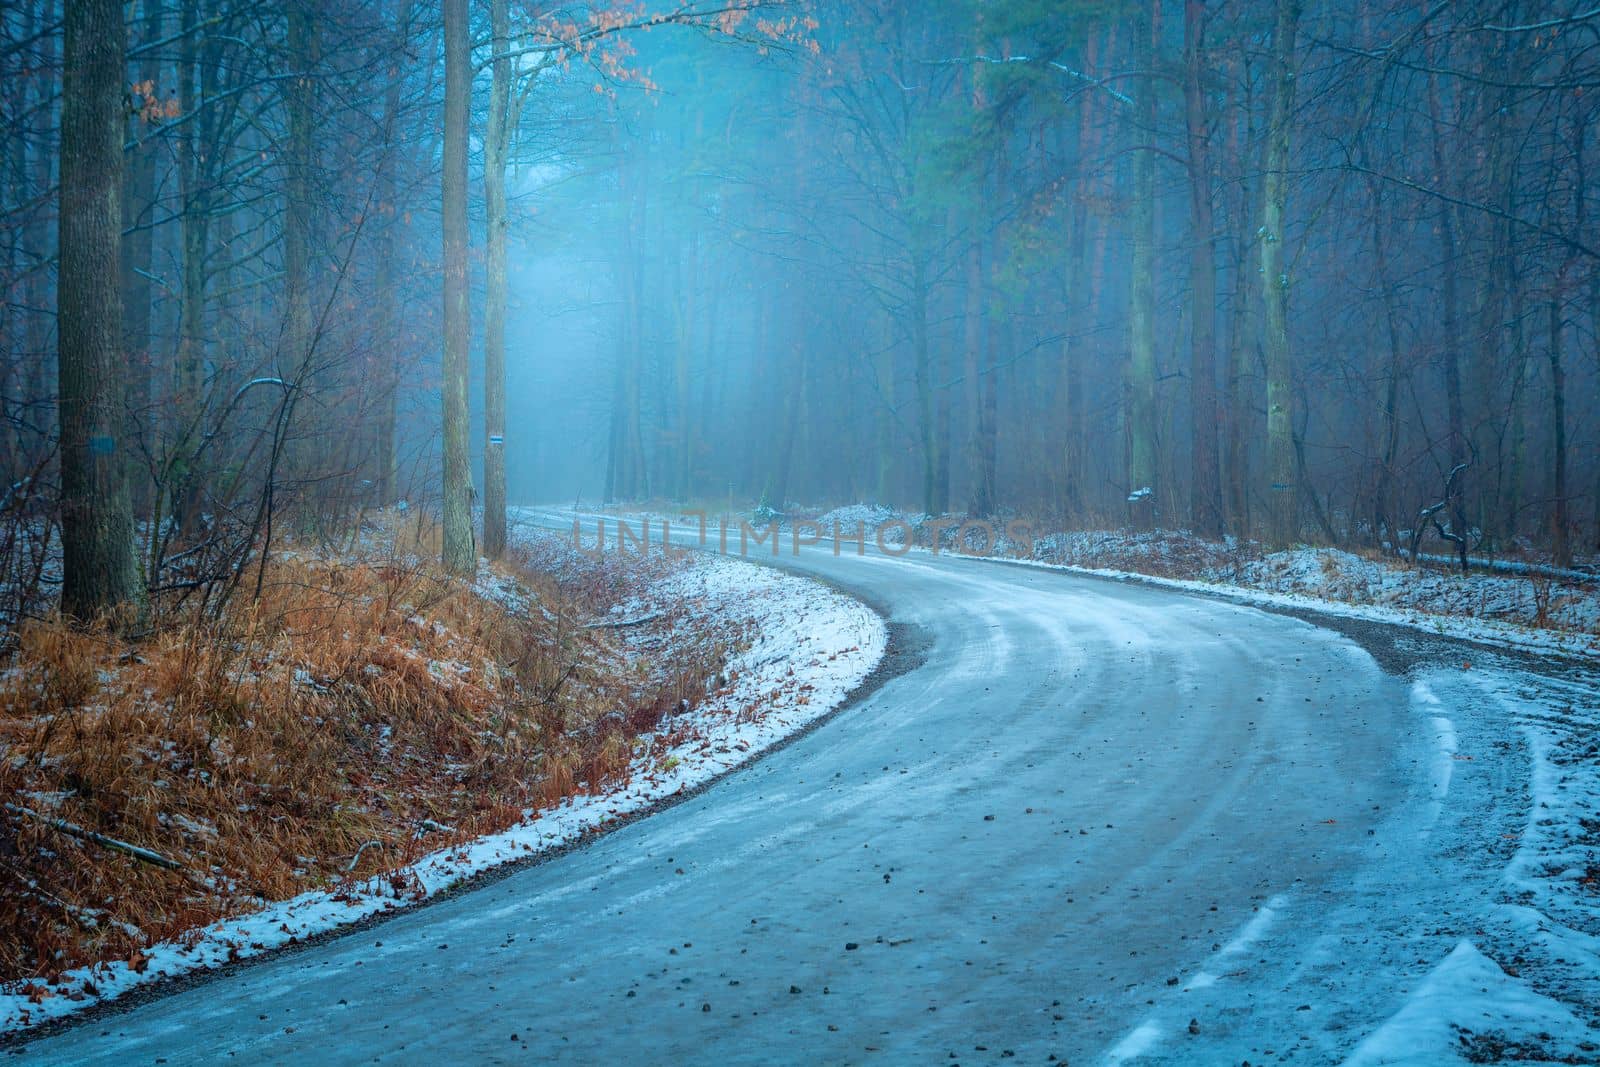 A bend on the road in a foggy winter forest